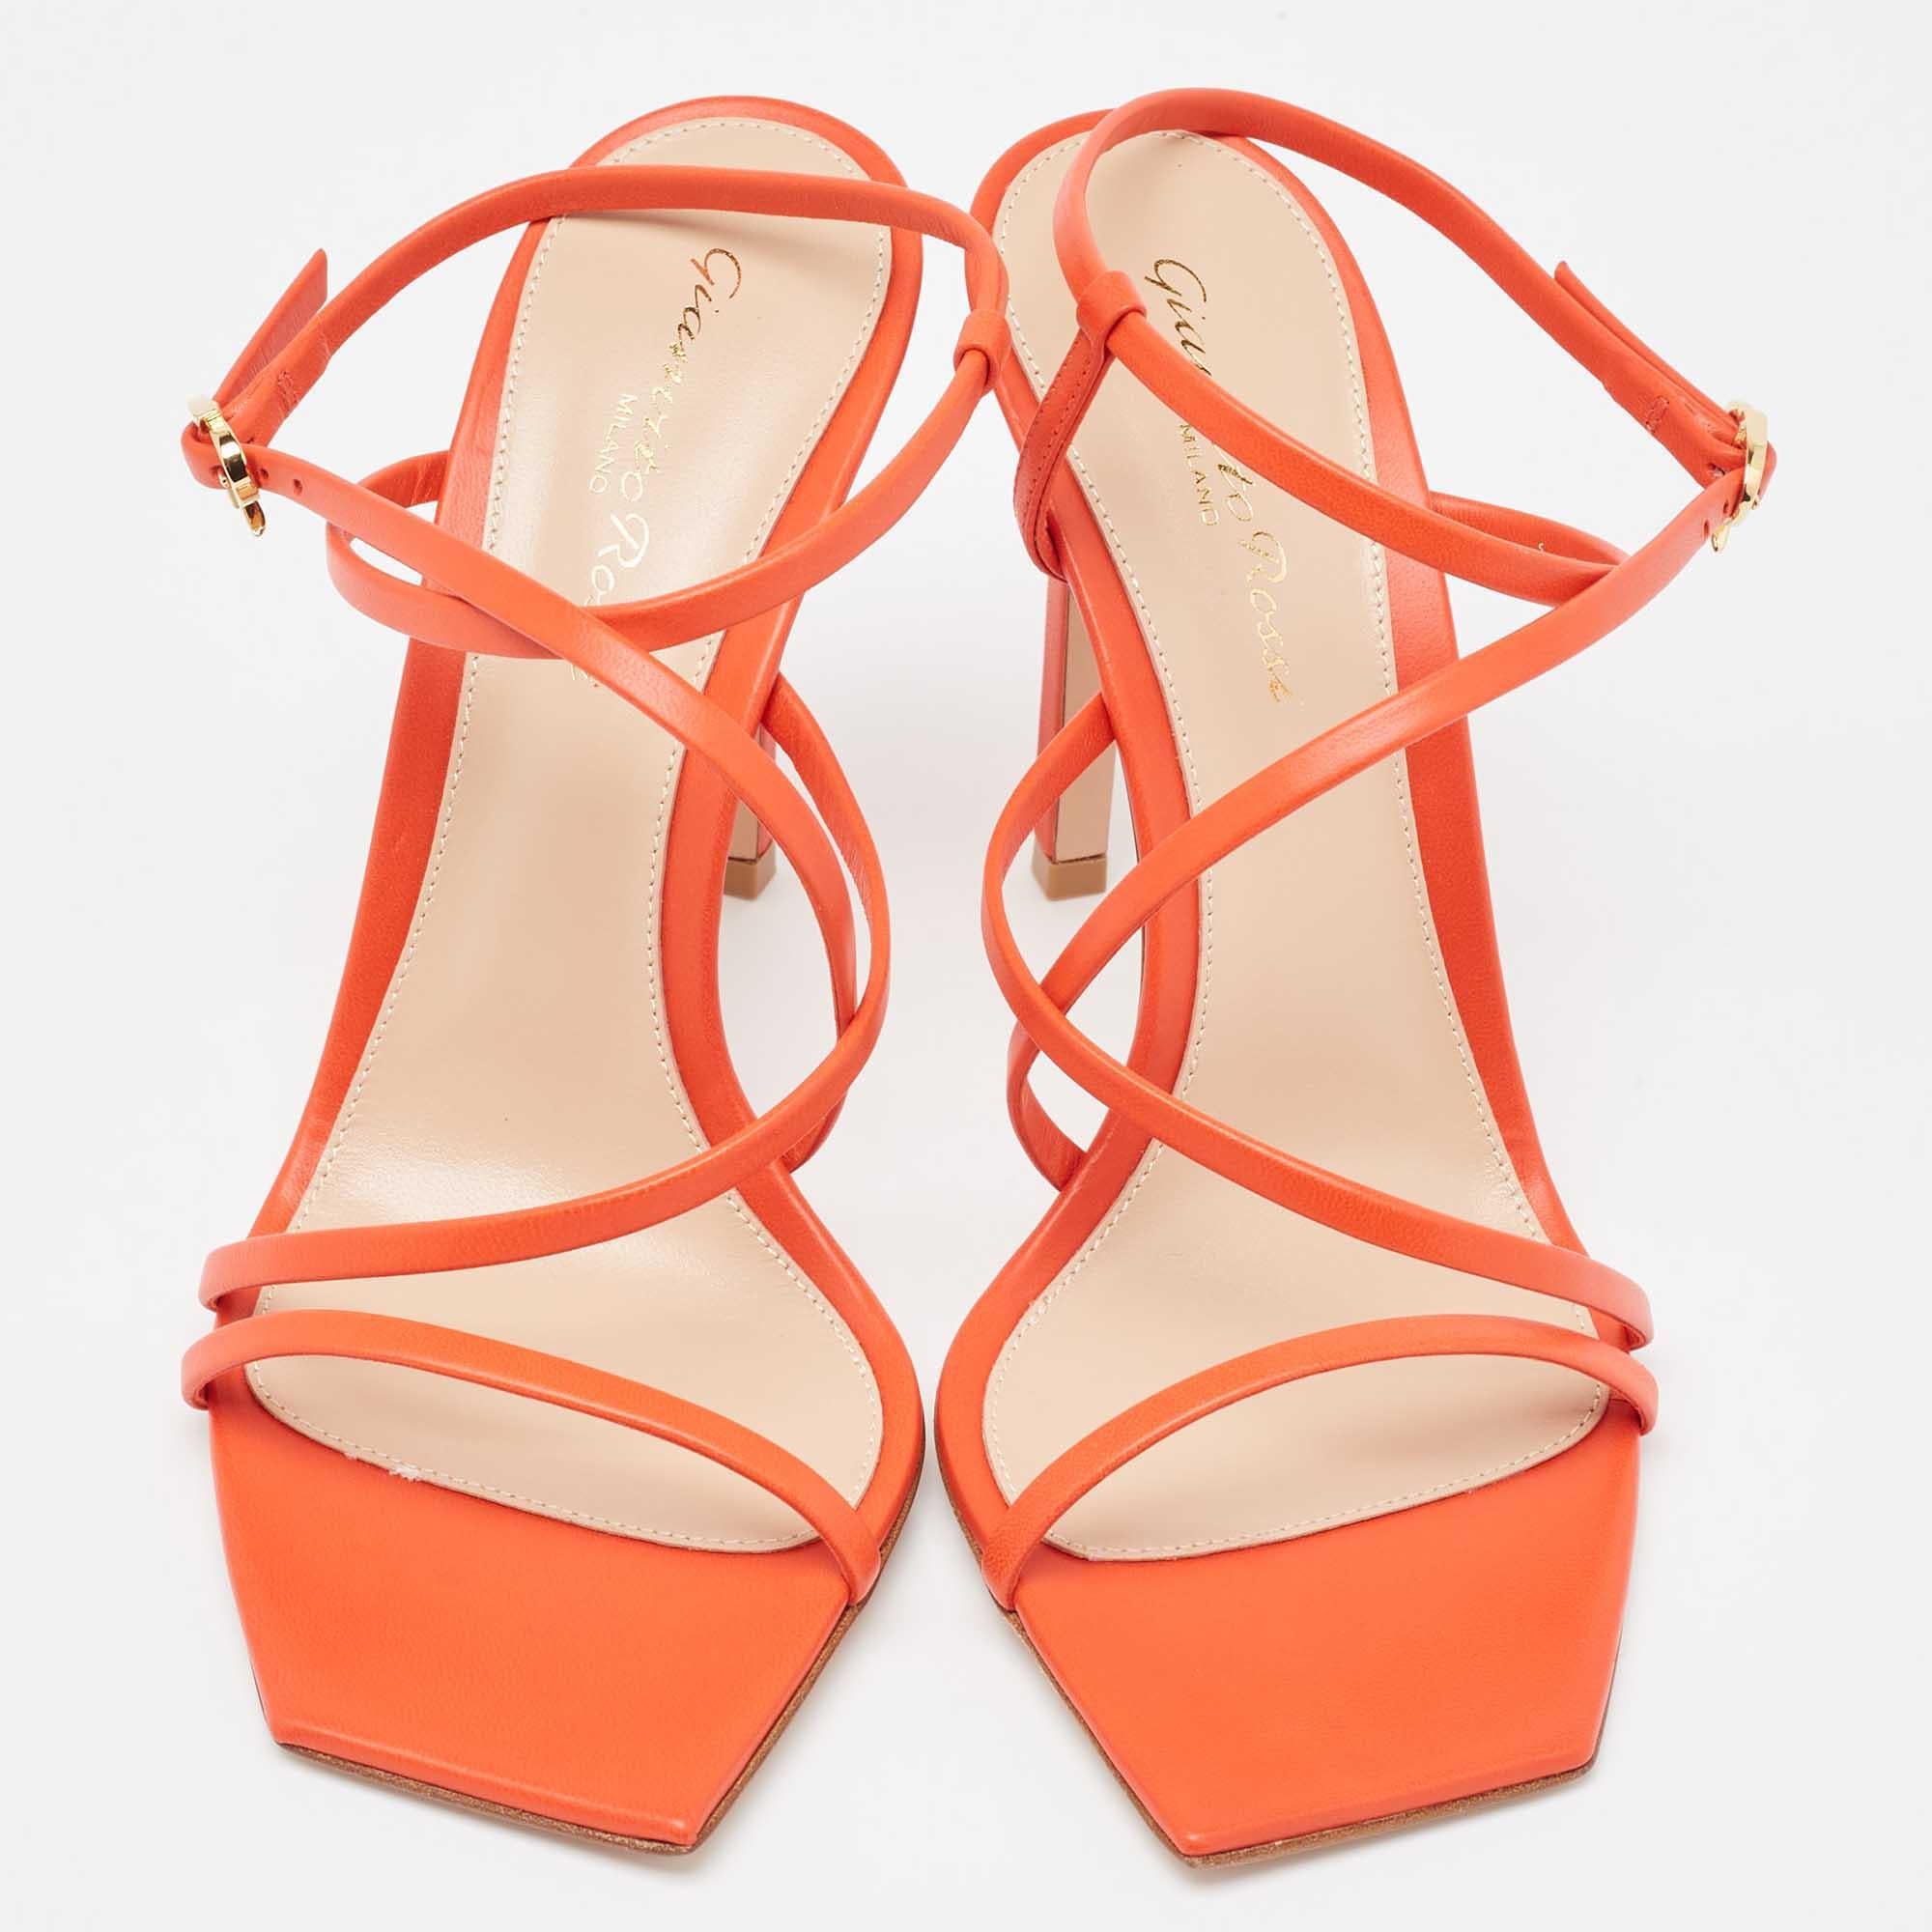 In vibrant poppy red leather, the Gianvito Rossi Manilla sandals exude confident charm. Delicate straps gracefully embrace the foot, while a sturdy heel provides stability and style. With impeccable craftsmanship and timeless design, these sandals